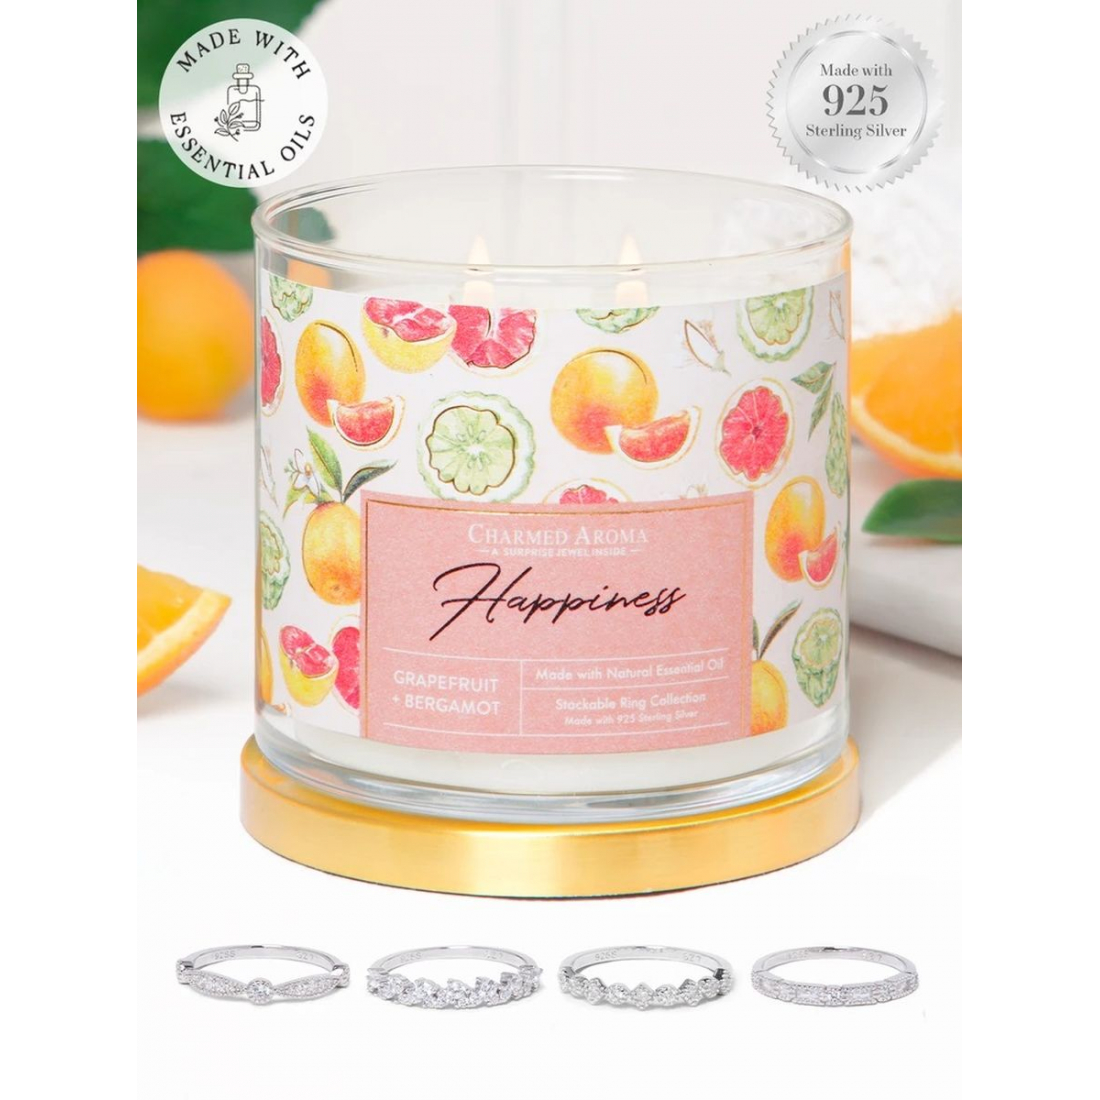 Women's 'Happiness' Candle Set - 500 g